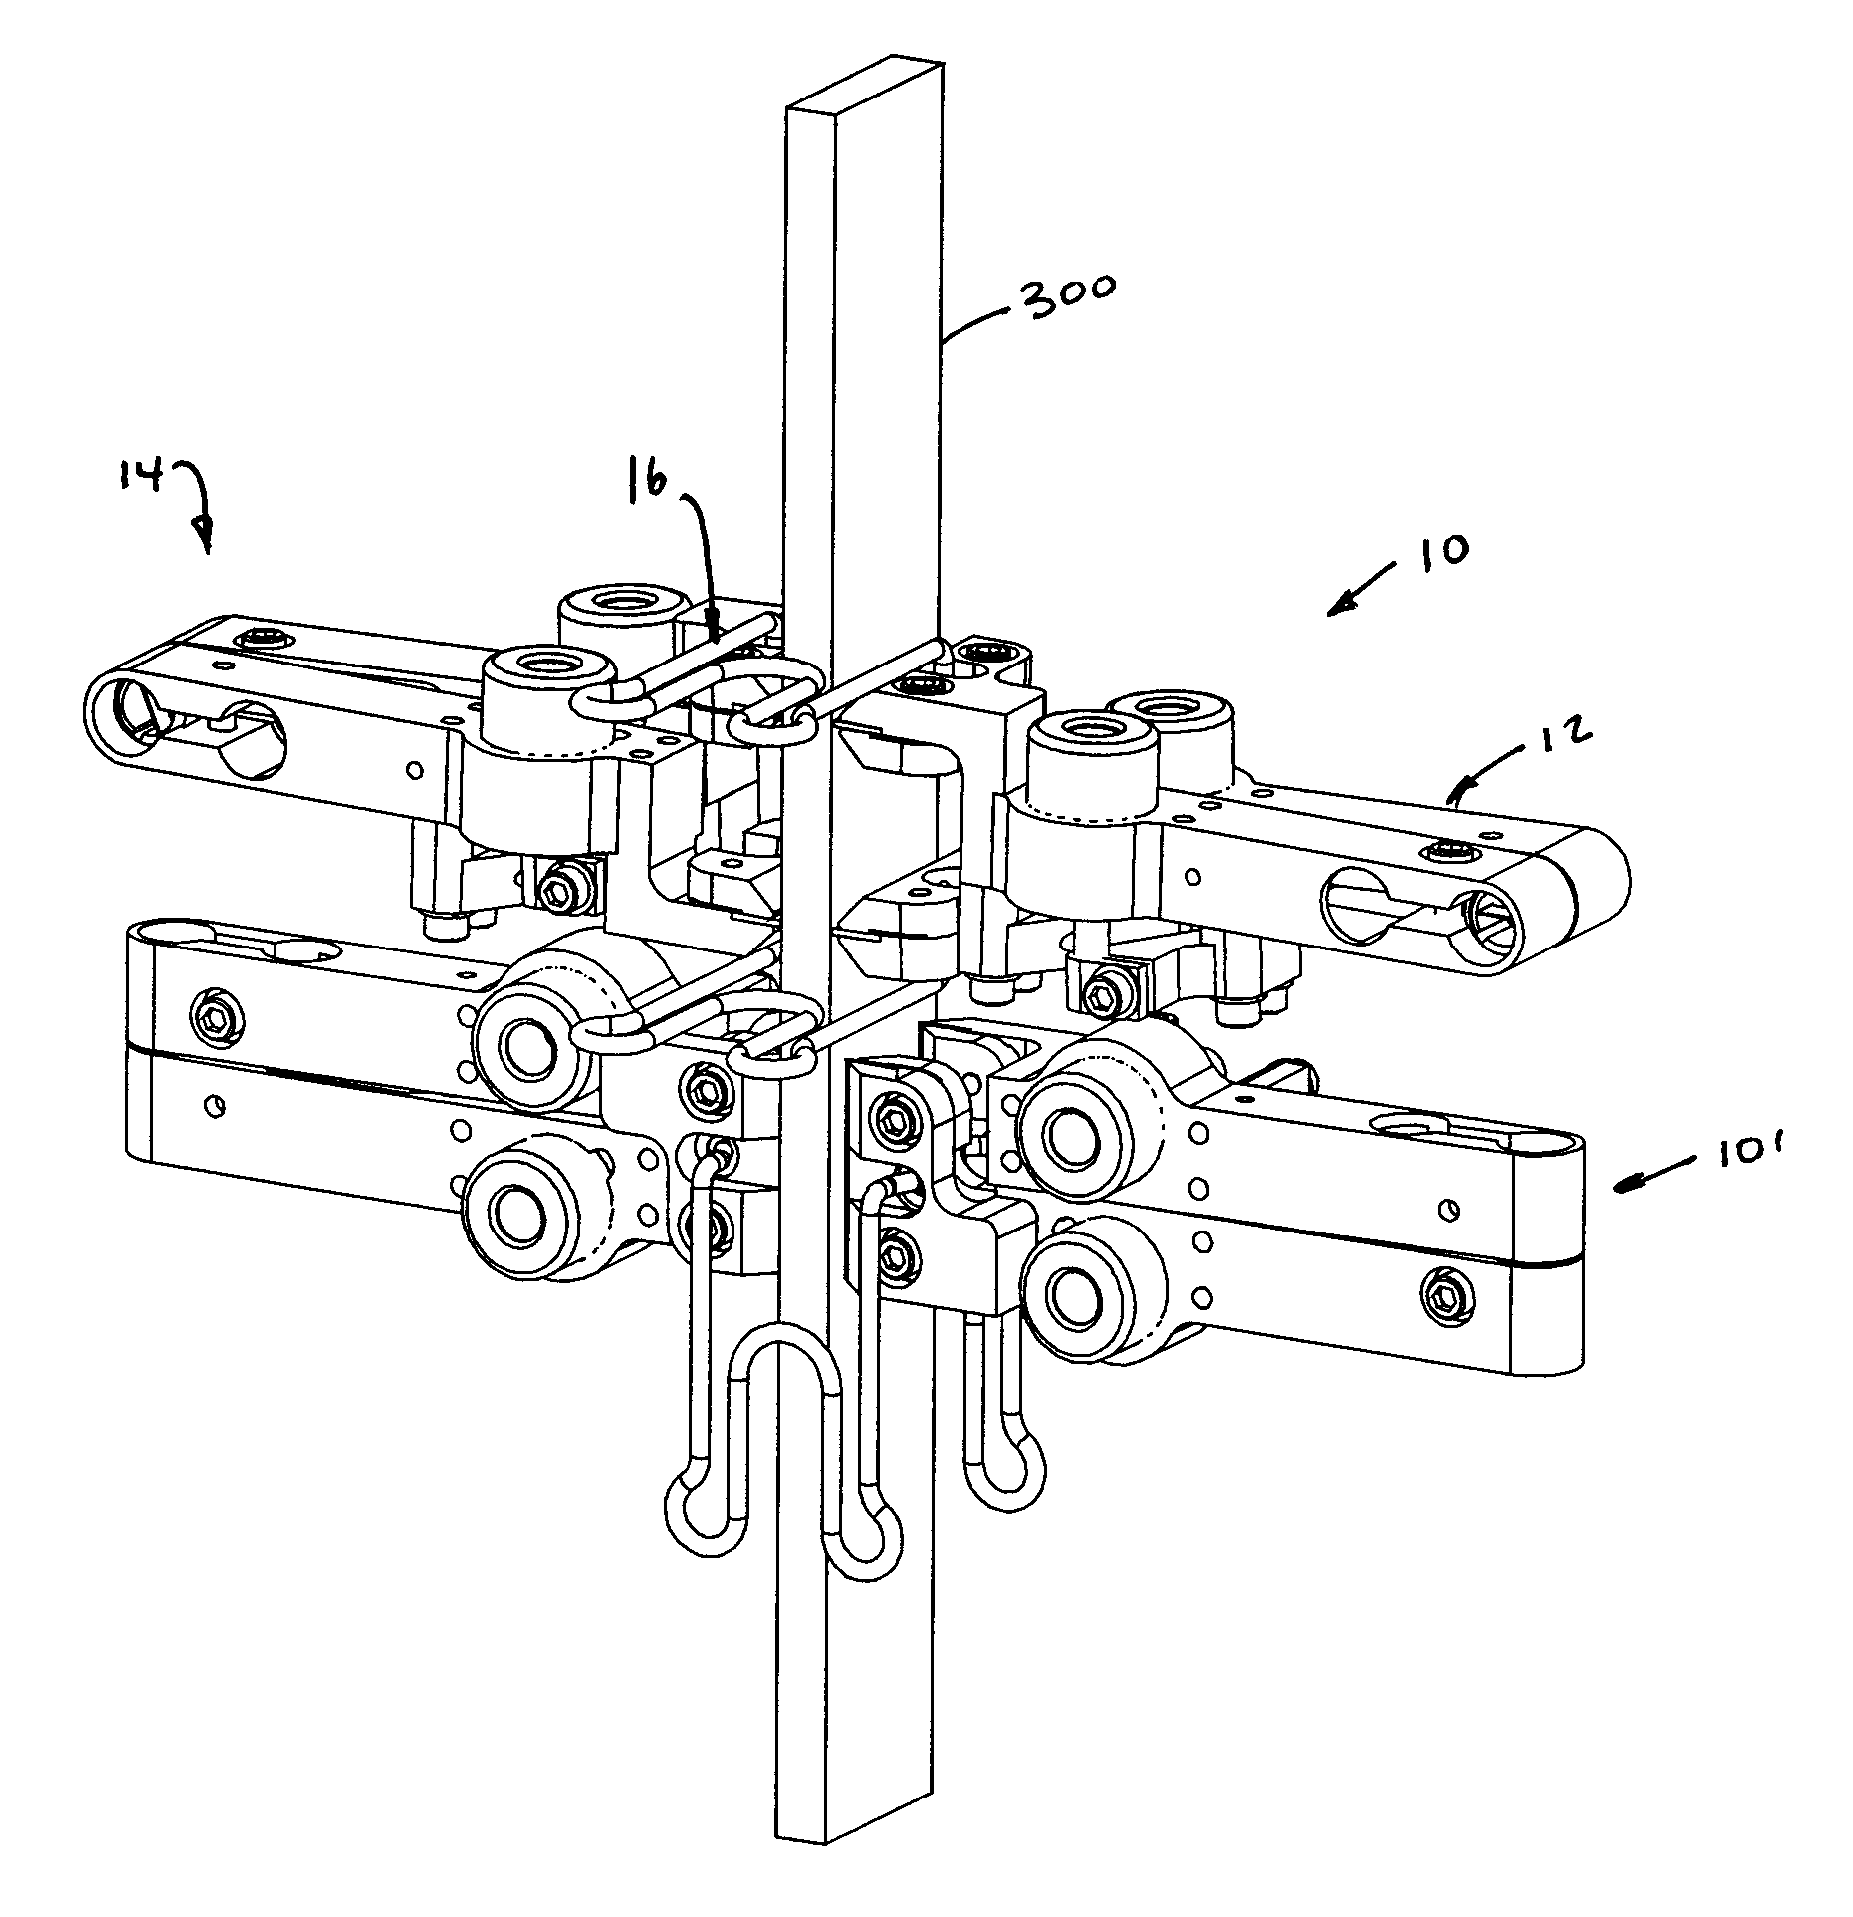 Extensometer assembly for use in material testing systems